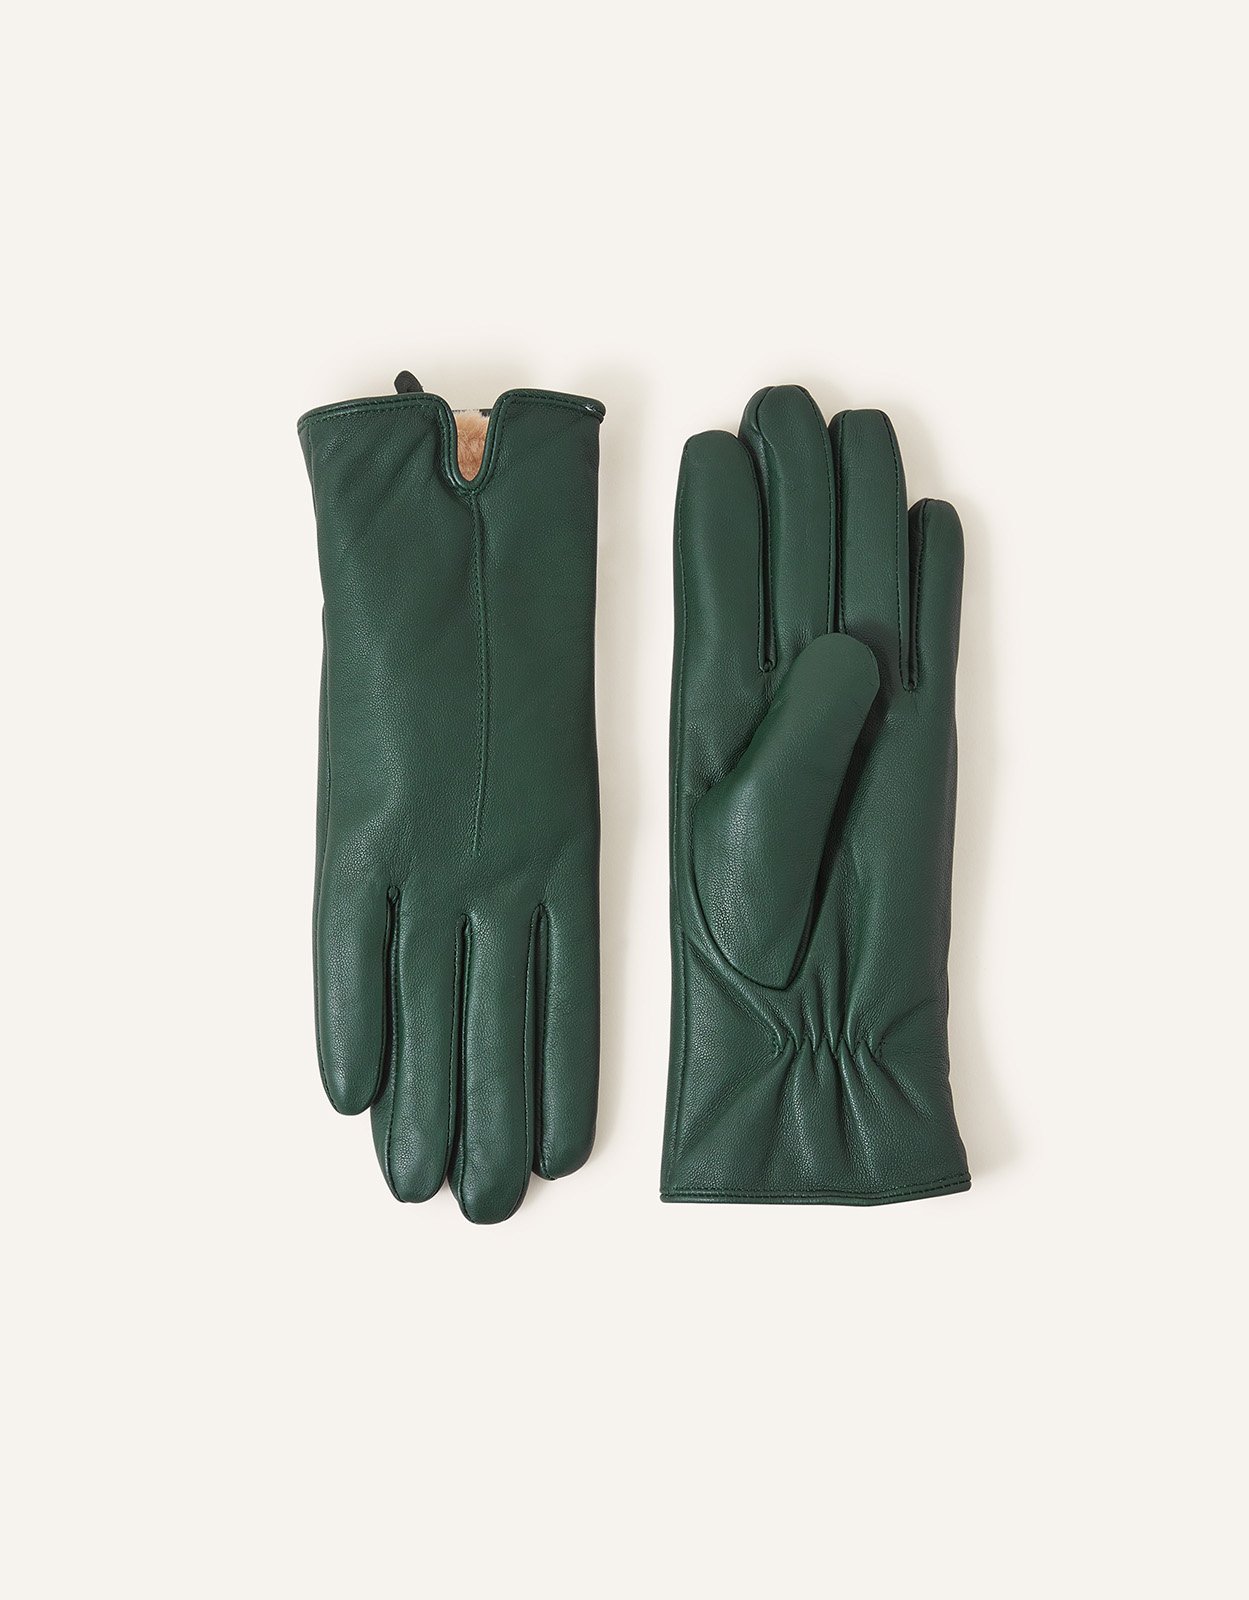 Accessorize Faux Fur-Lined Leather Gloves Green, Size: One Size